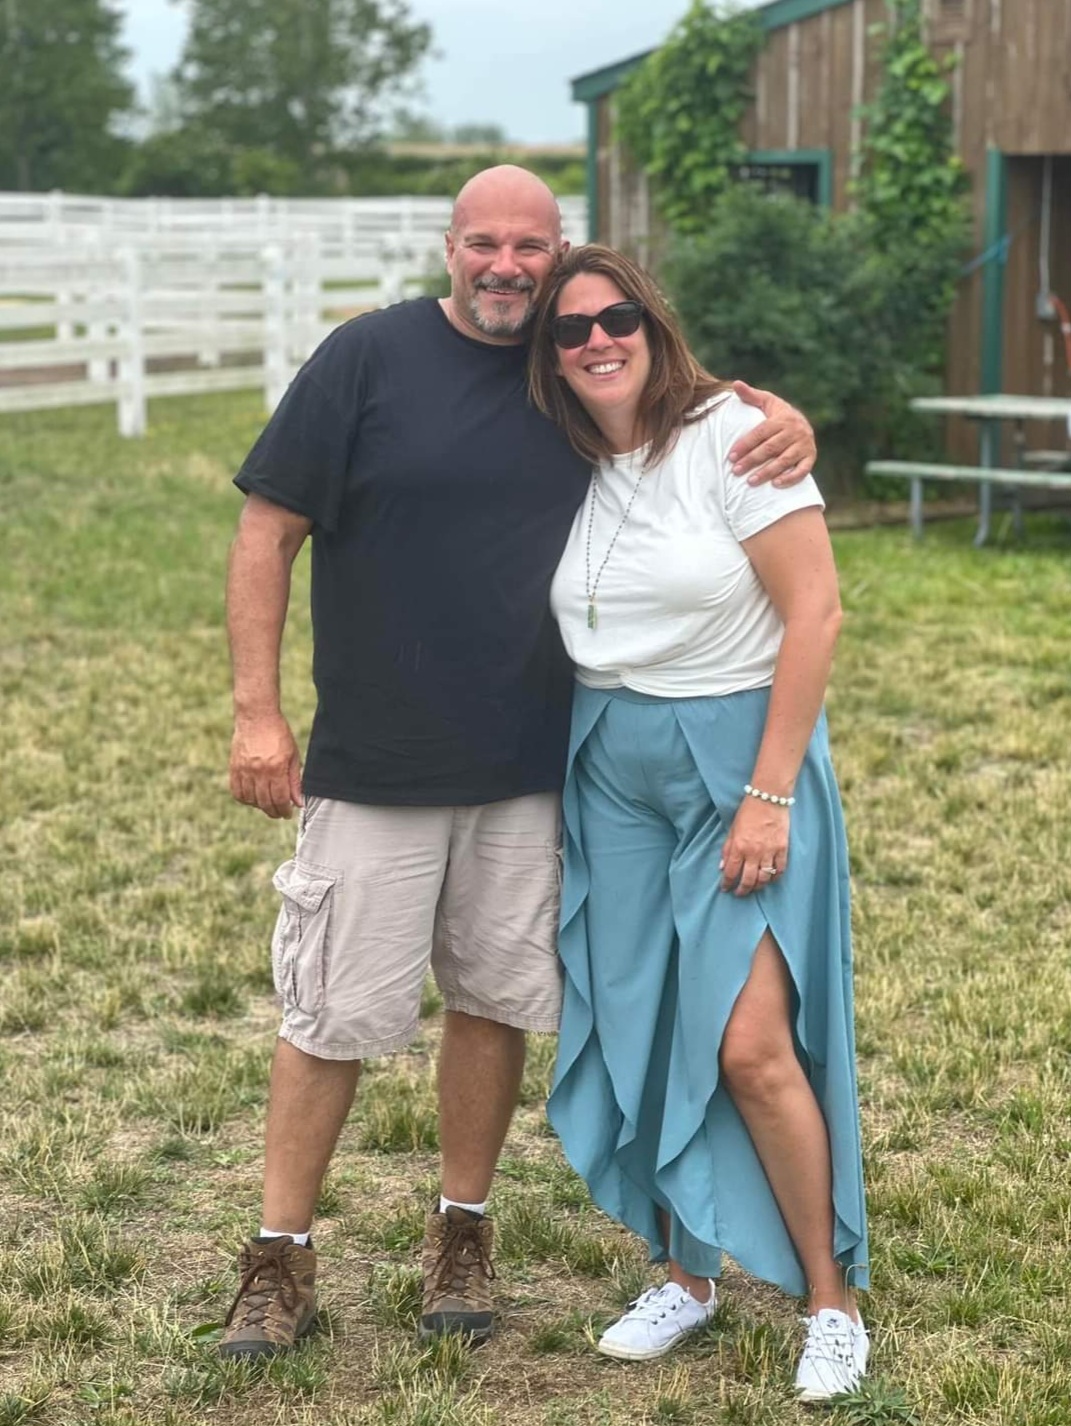 Two people embracing outside a wooden horse barn at an outdoor event.